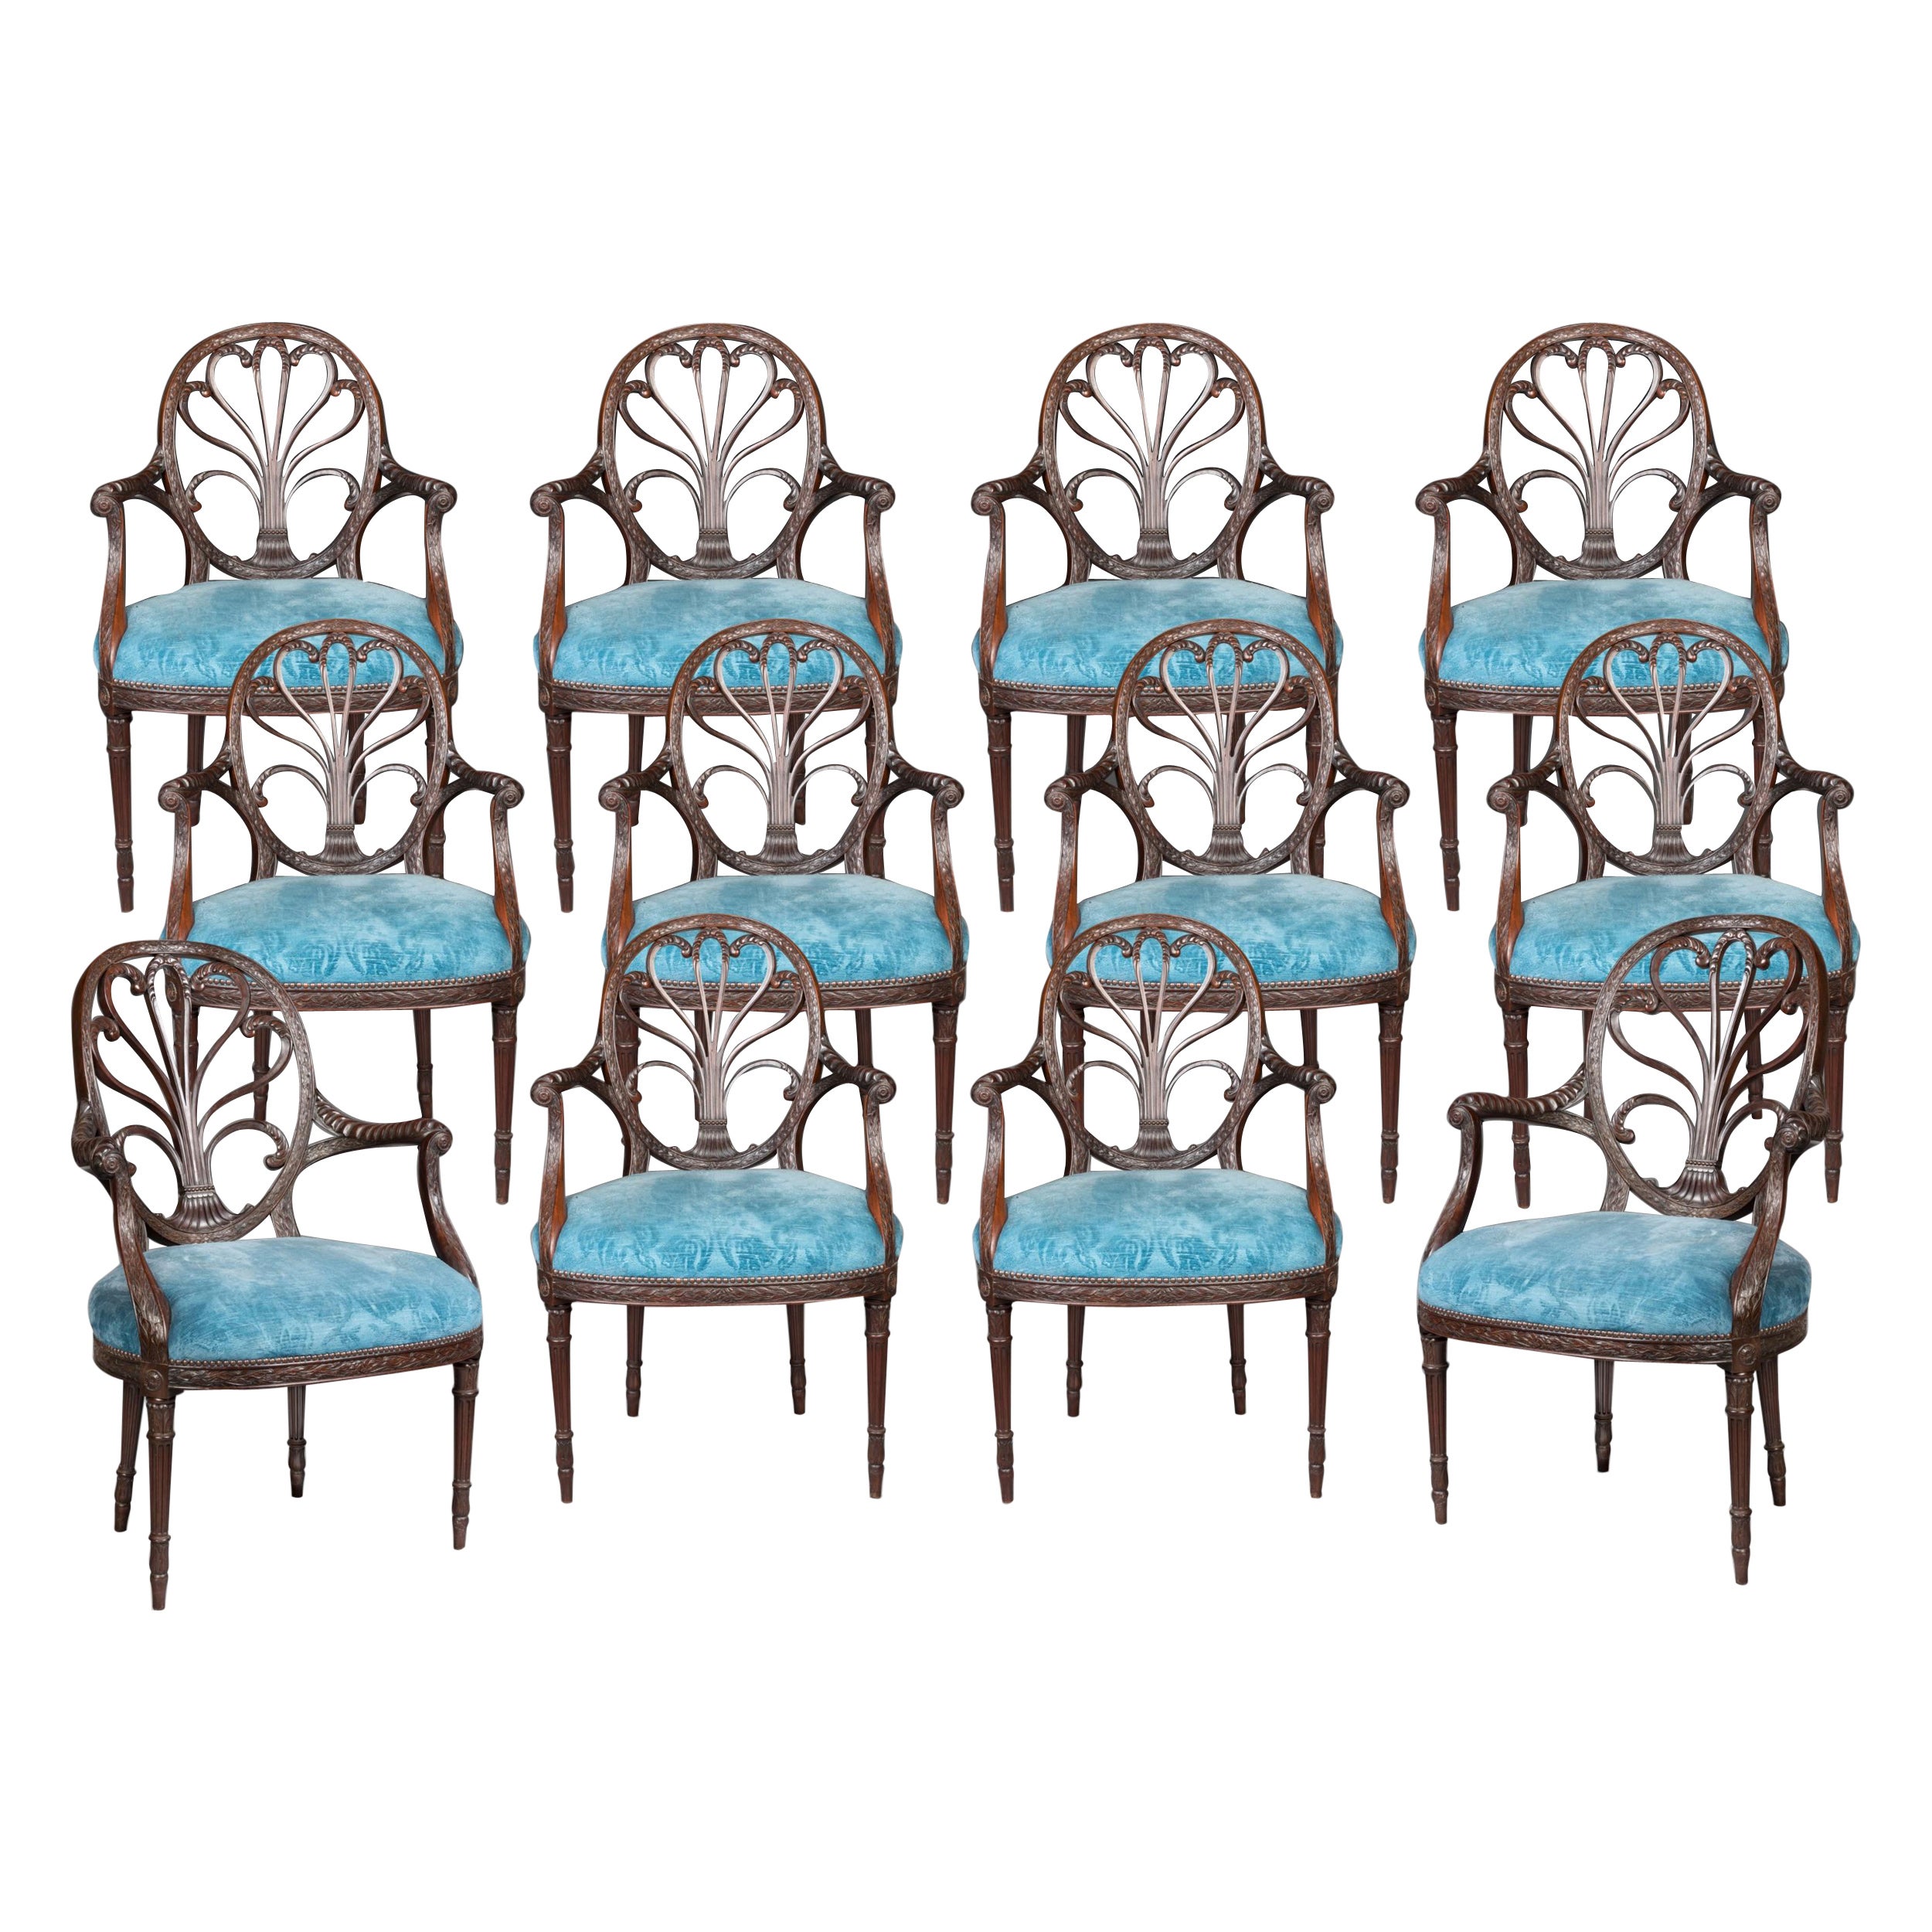 Set of Twelve 19th Century English Neo-Classical Mahogany Dining Chairs